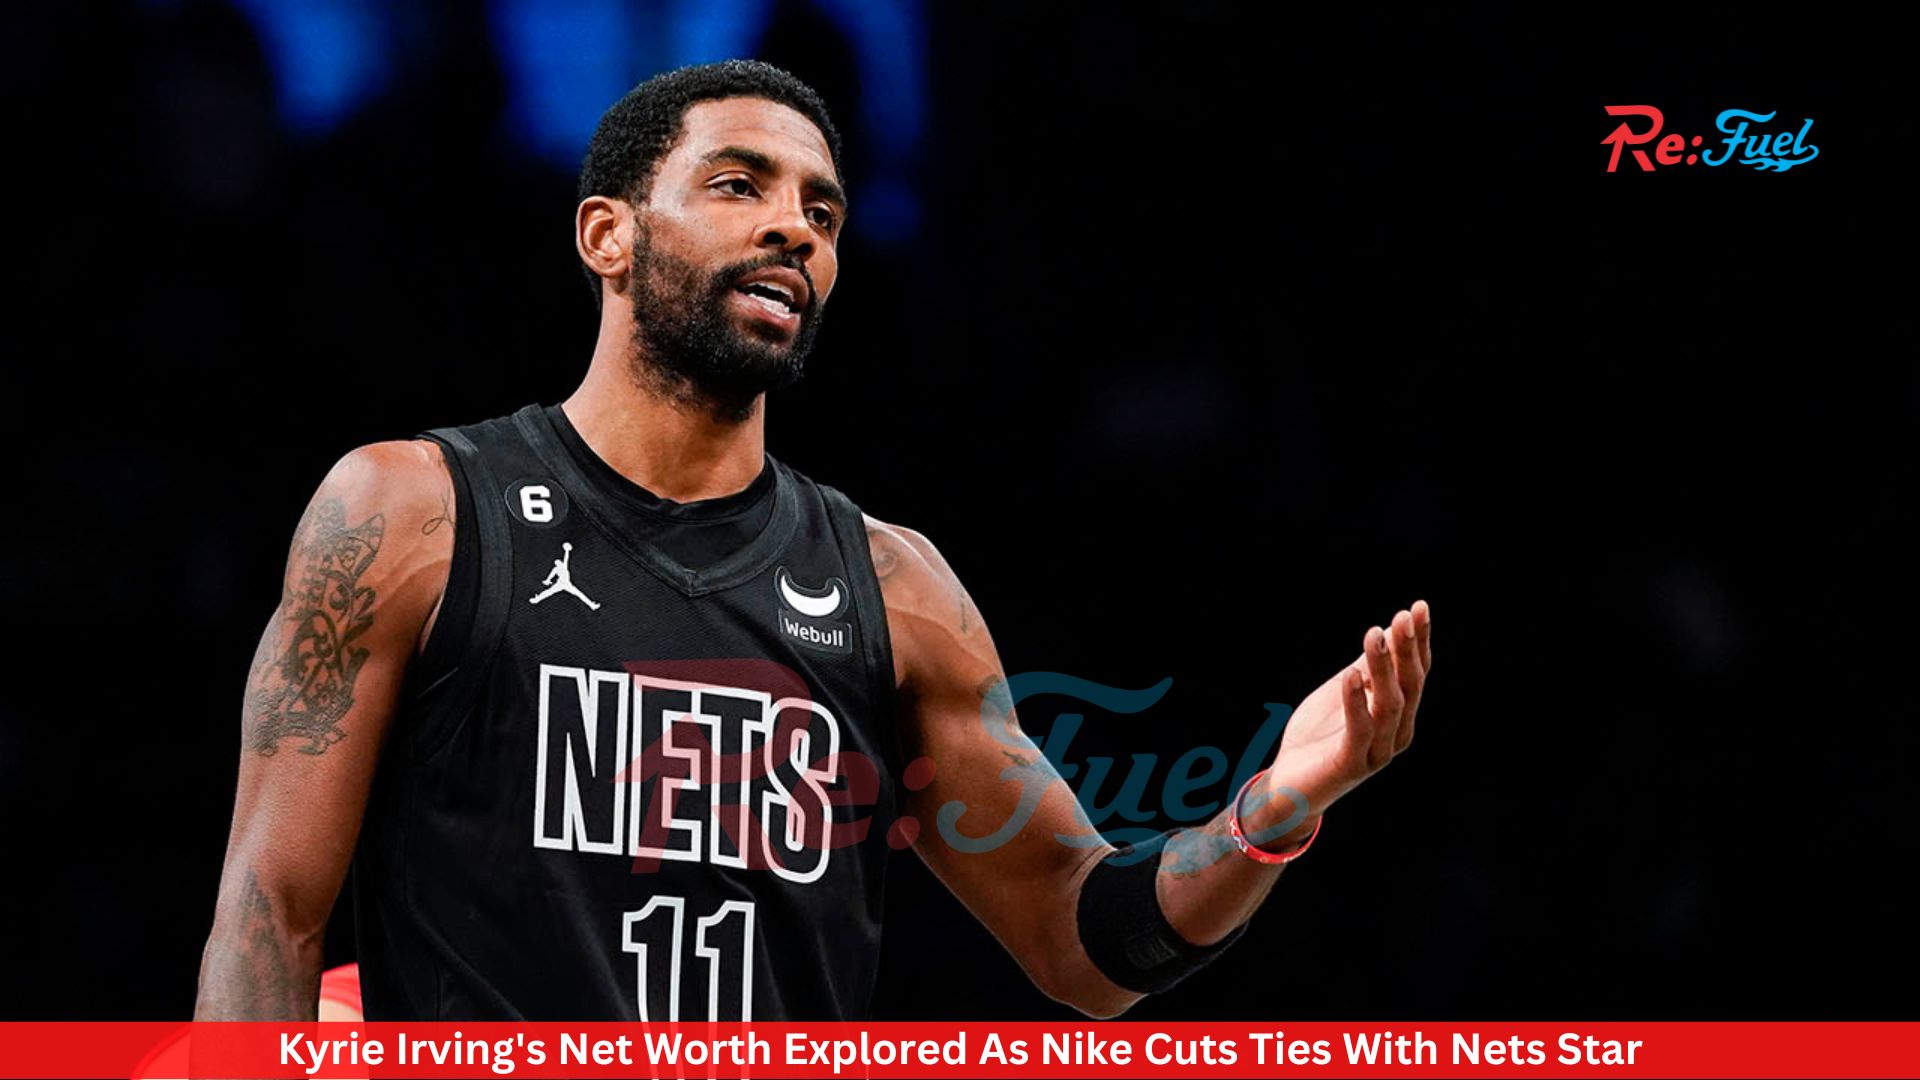 Kyrie Irving's Net Worth Explored As Nike Cuts Ties With Nets Star